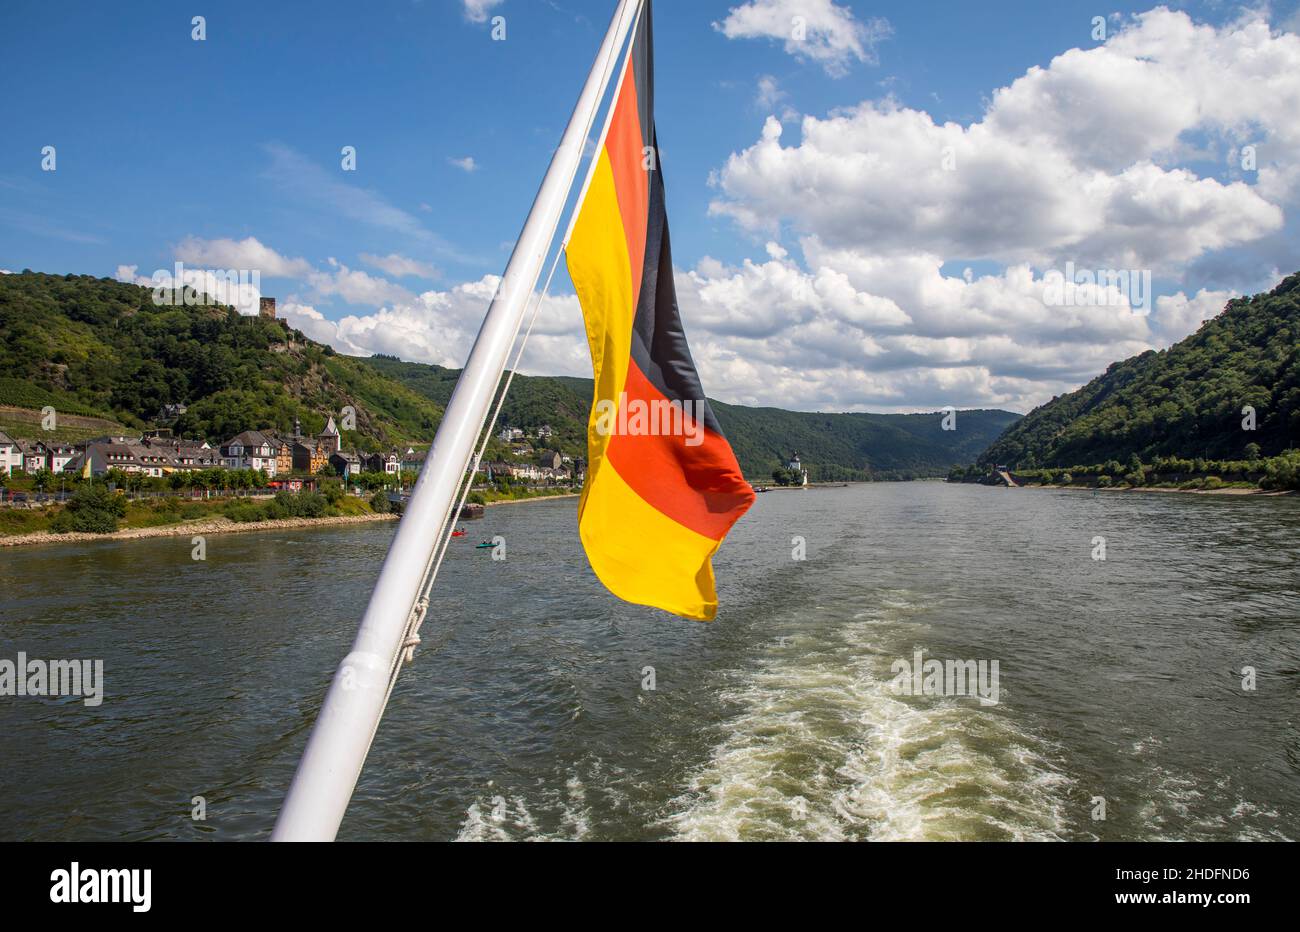 Trip with the excursion boat Vater Rhein in the Upper Middle Rhine Valley, UNESCO World Heritage Site, the town of Kaub,  Rhineland-Palatinate, German Stock Photo